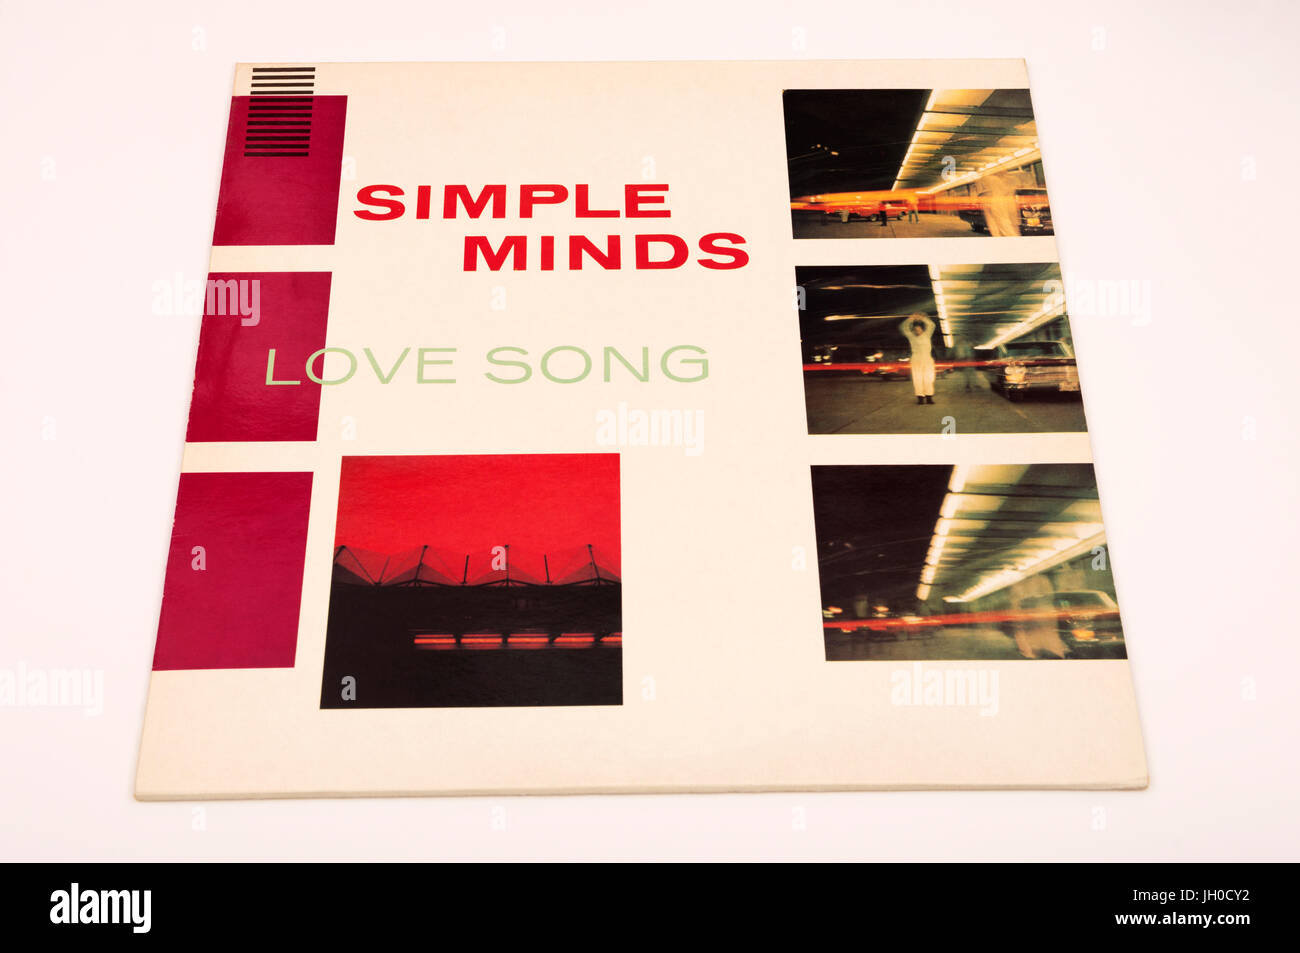 Simple Minds Love Song 12 pollici singolo in vinile Foto Stock